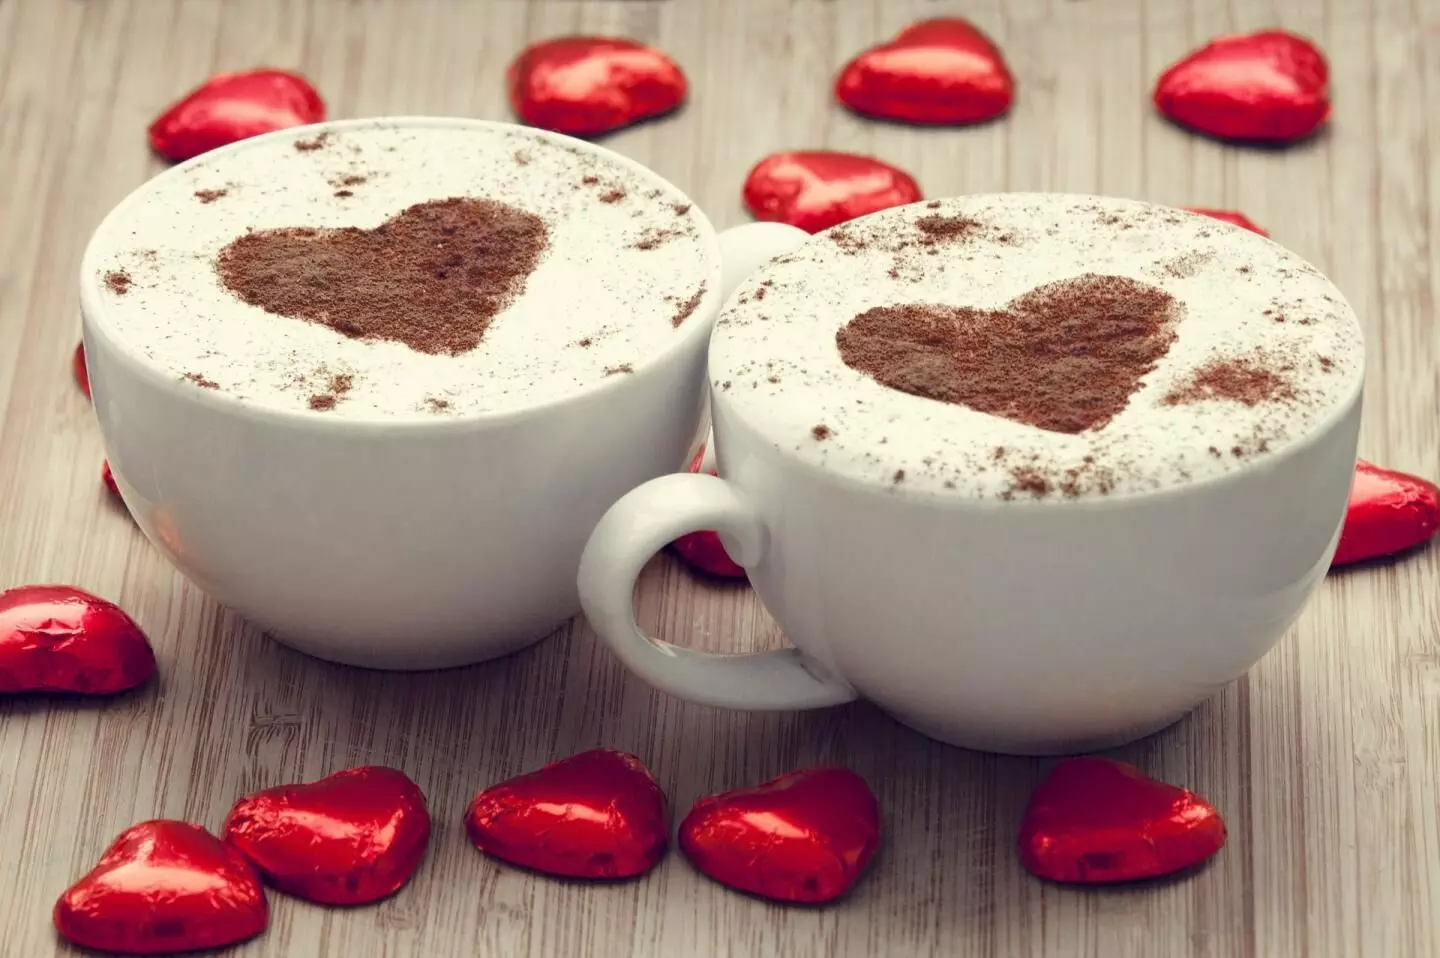 Daily 5 to 6 cups of coffee may raise blood lipids and heart disease risk